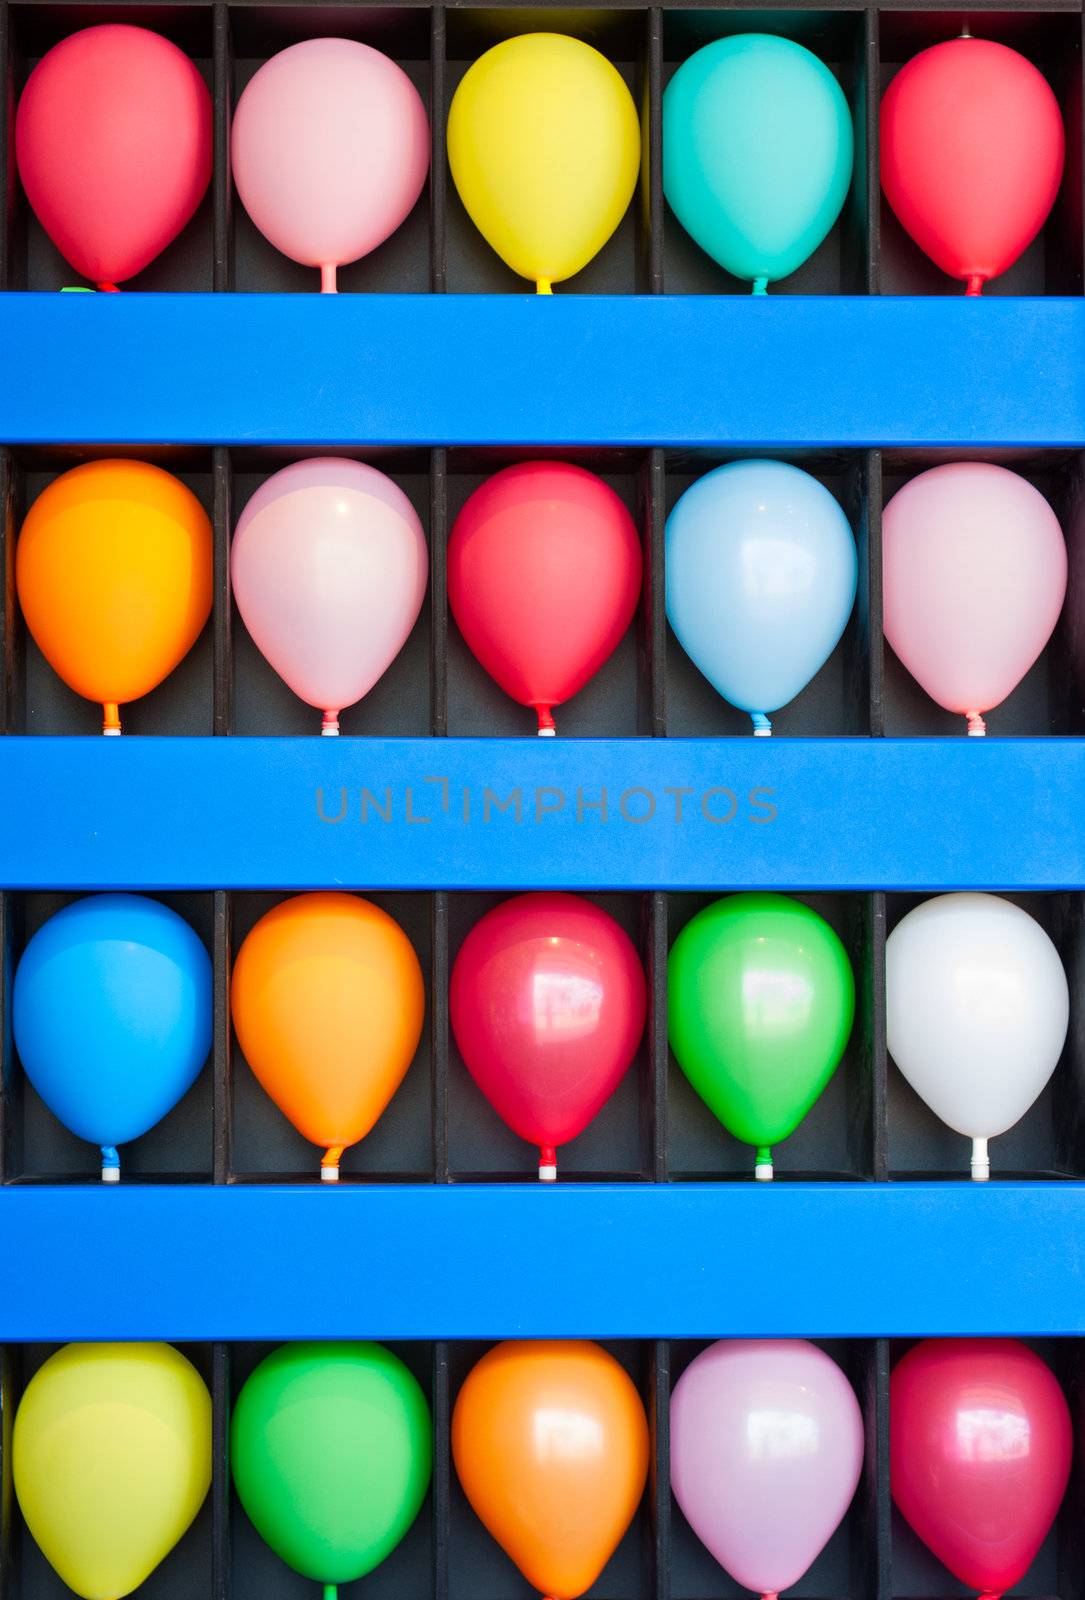 A blue wall case with colorful balloons. Photo is of a boardwalk arcade game. Only the wall case and balloons are shown.